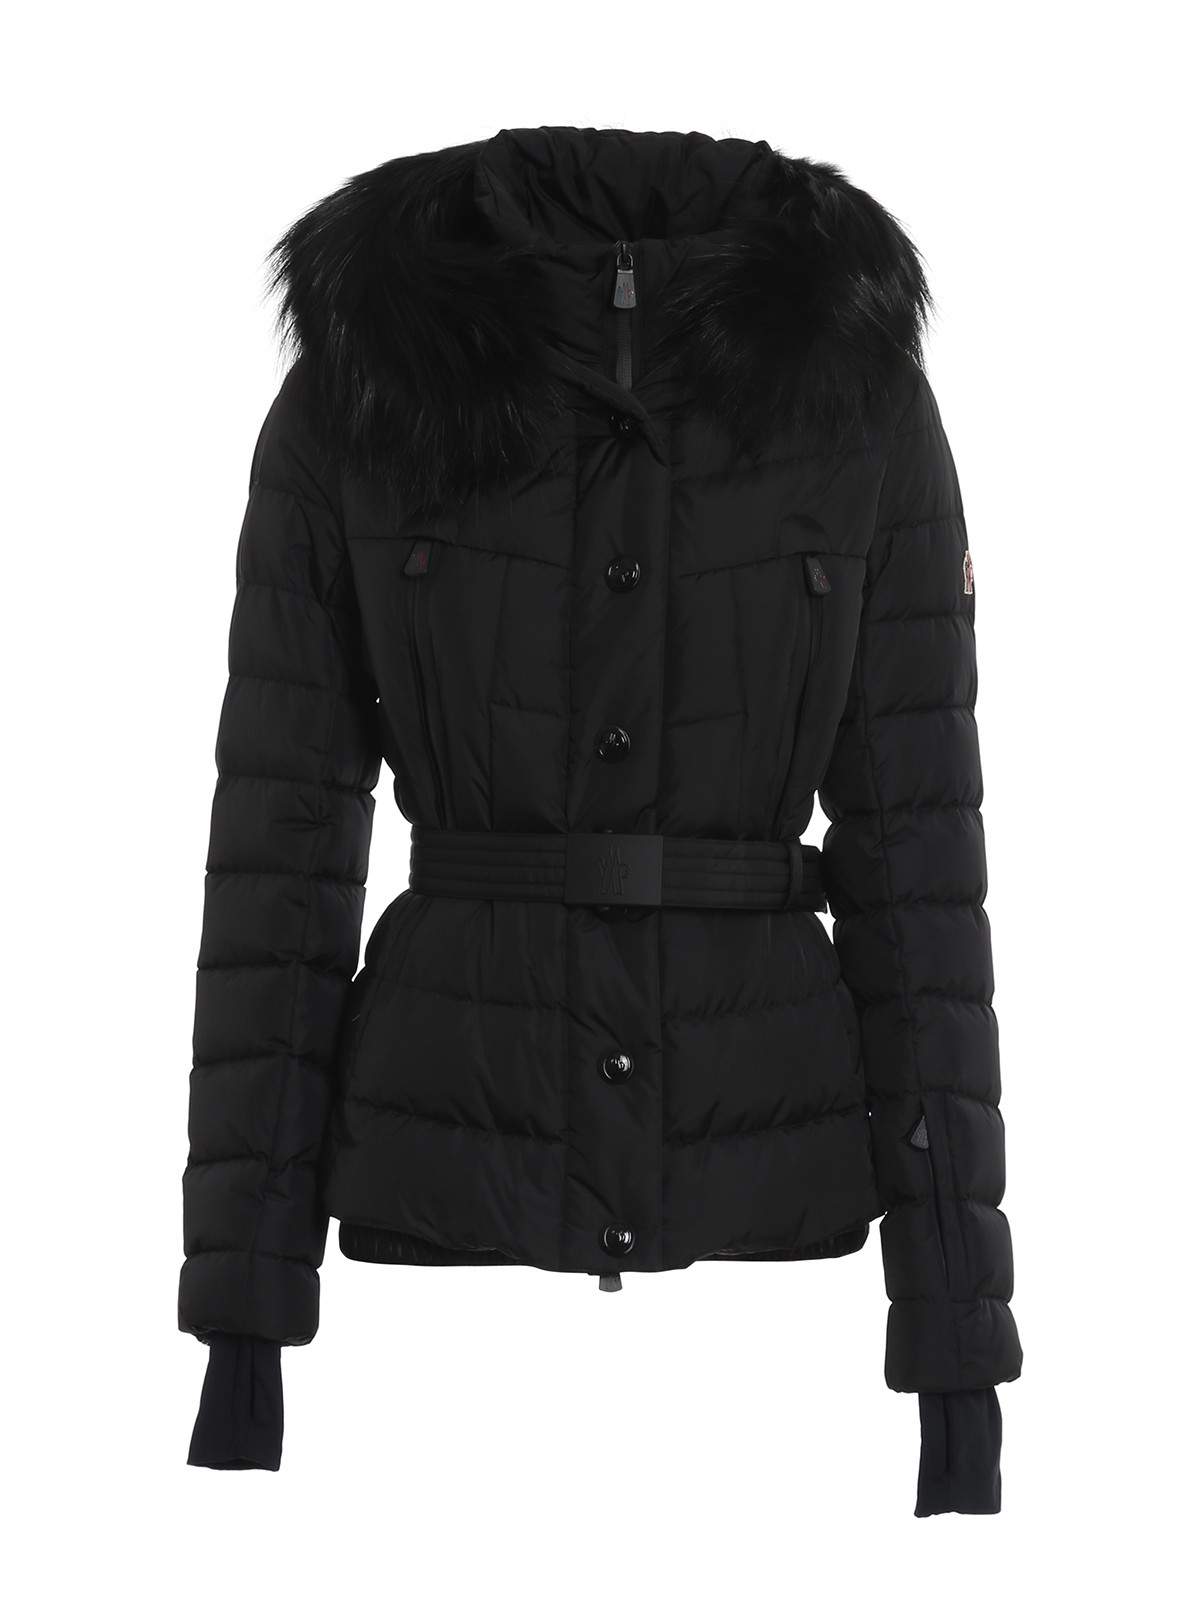 Padded jackets Moncler Grenoble - Beverley puffer jacket - 1A510025399E999